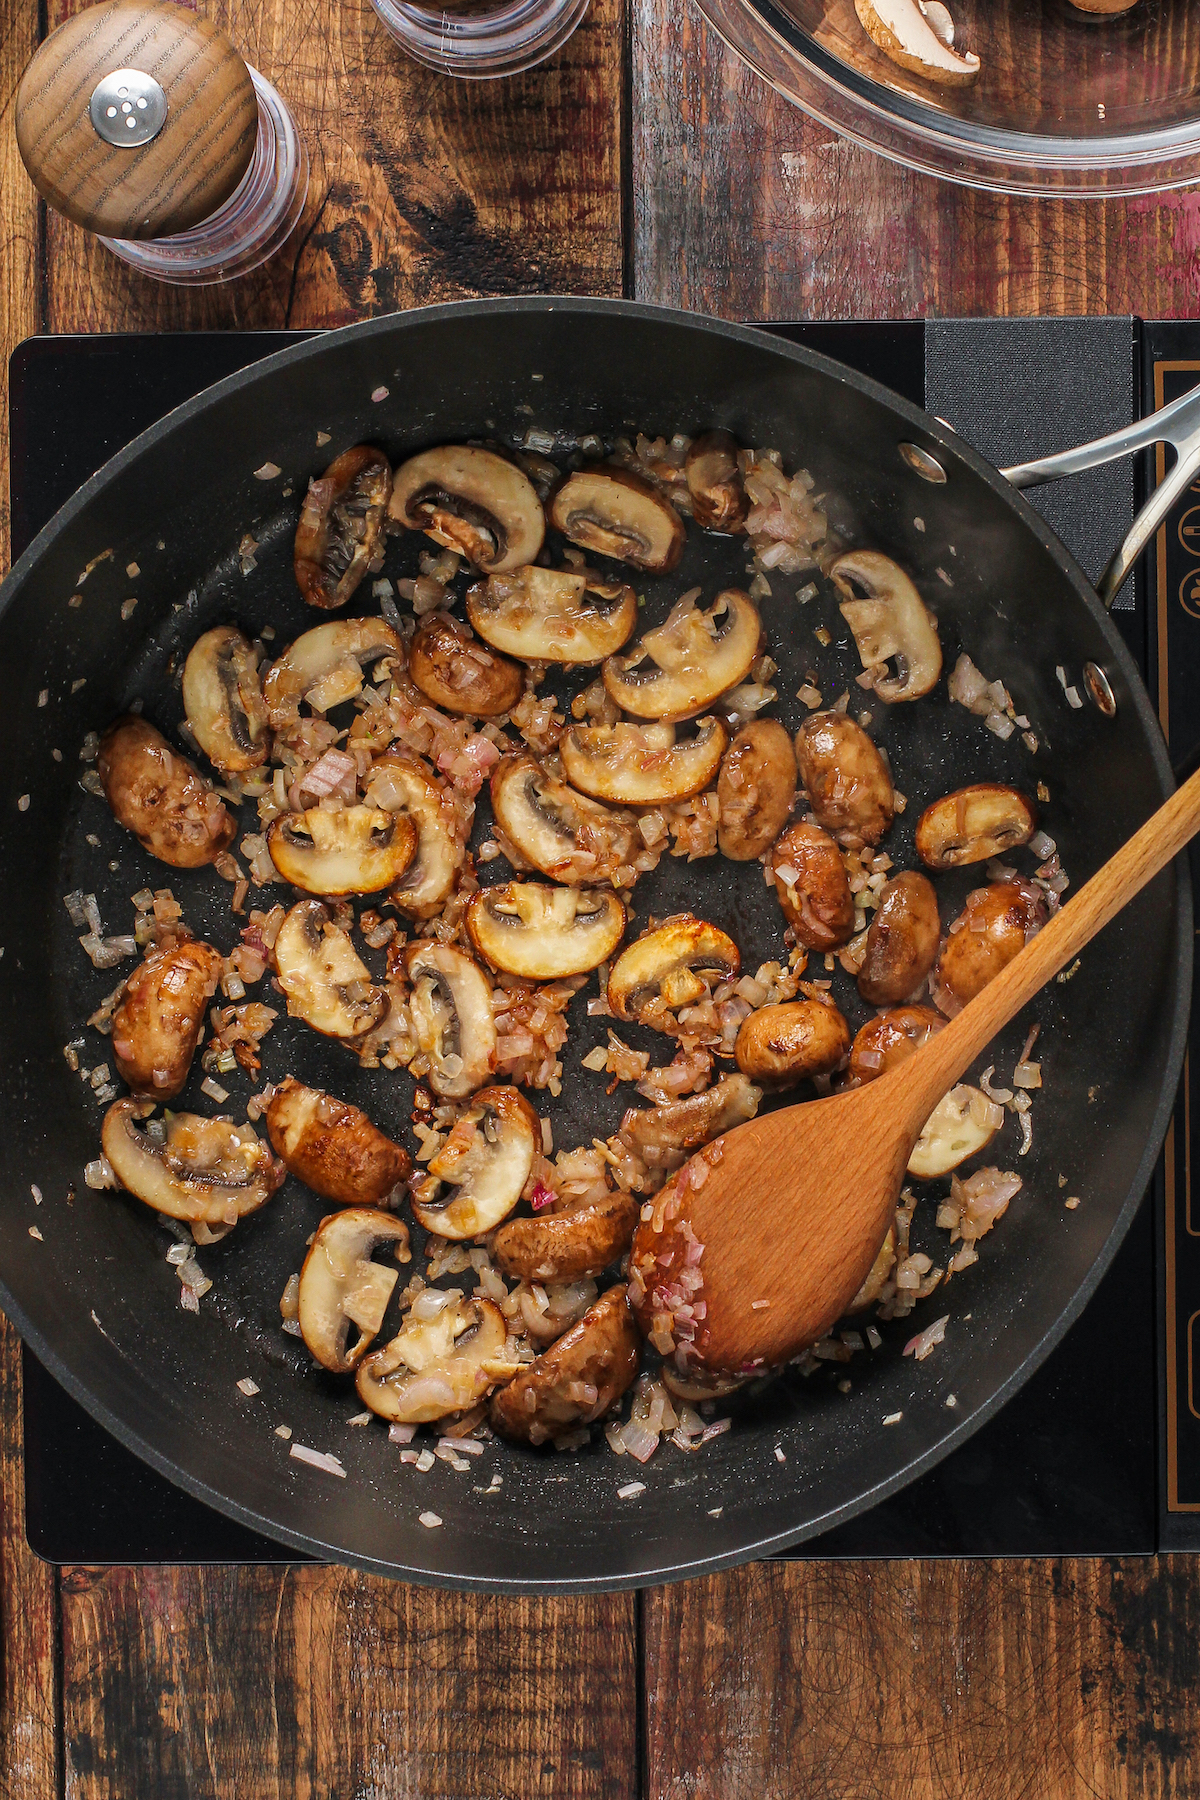 Mushrooms and shallots in a skillet.